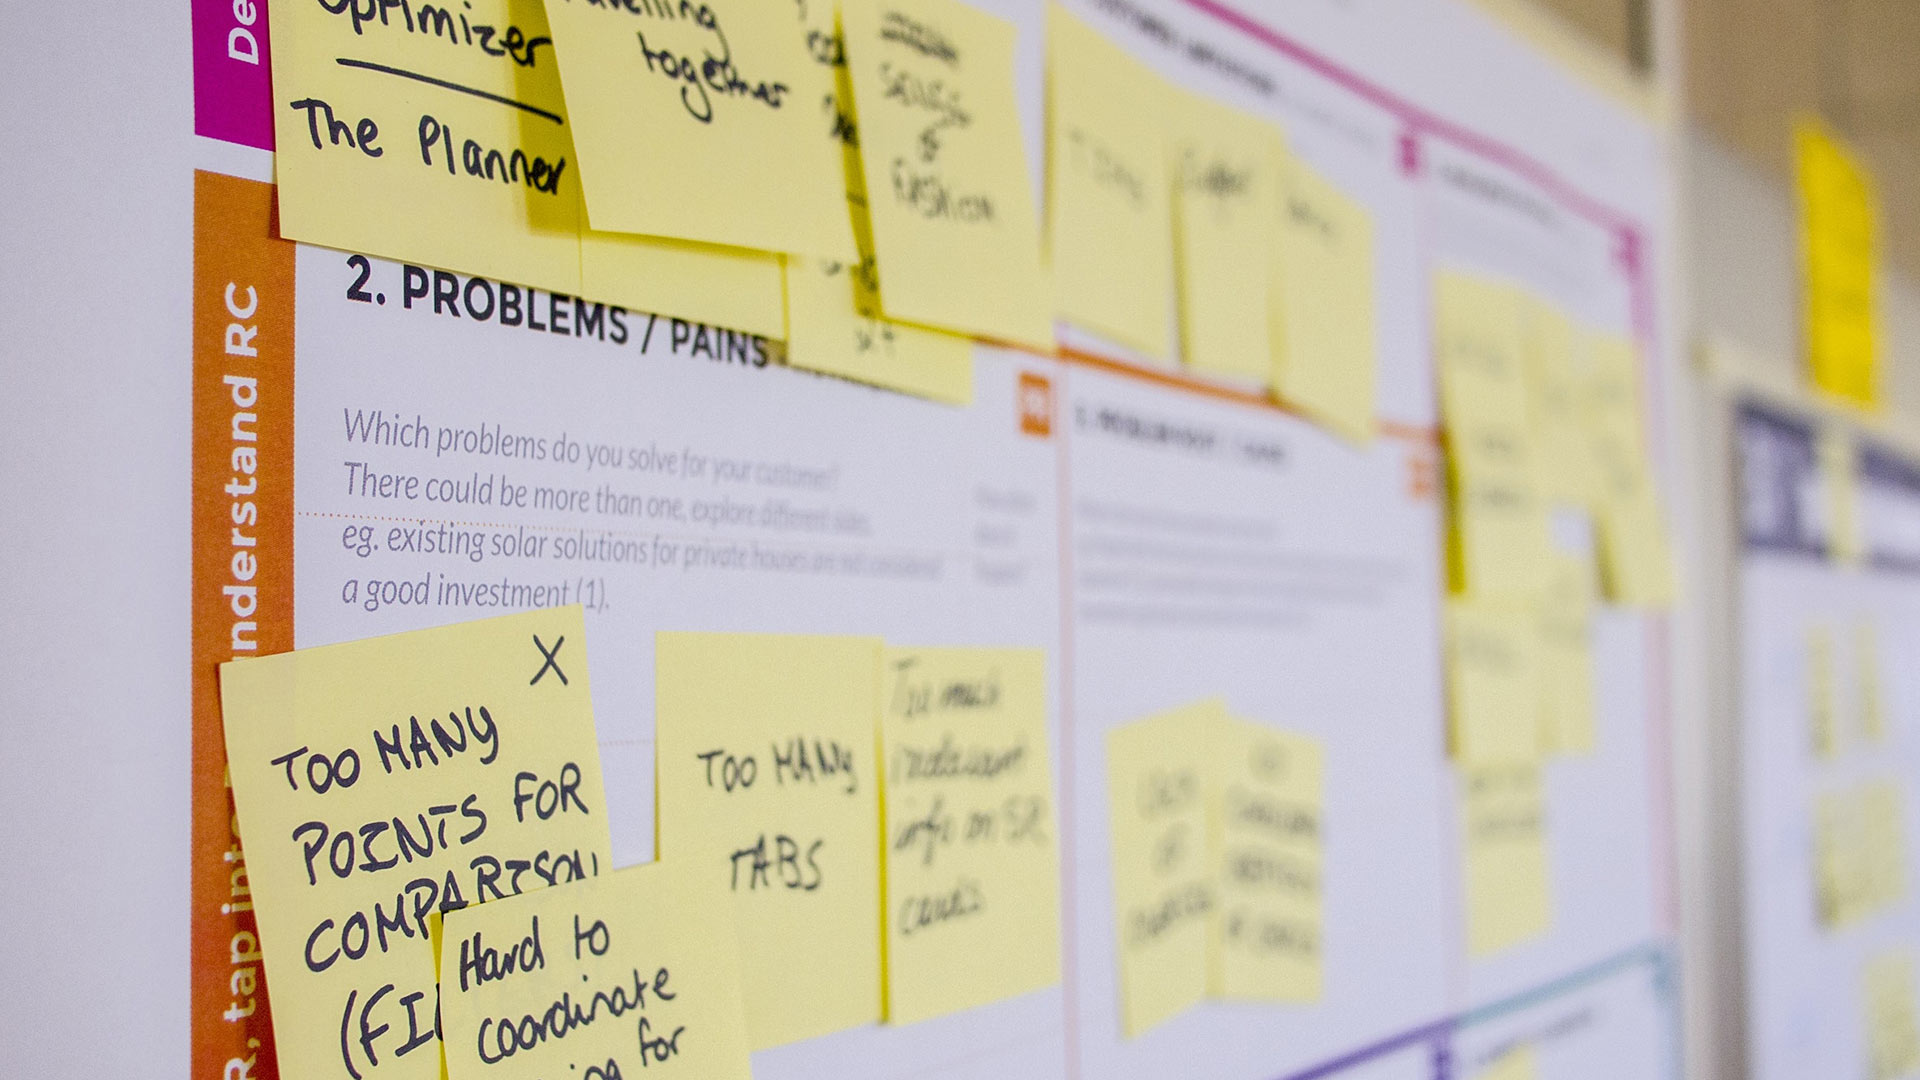 A colorful planning wall with several post-it notes of marketing plans and details.